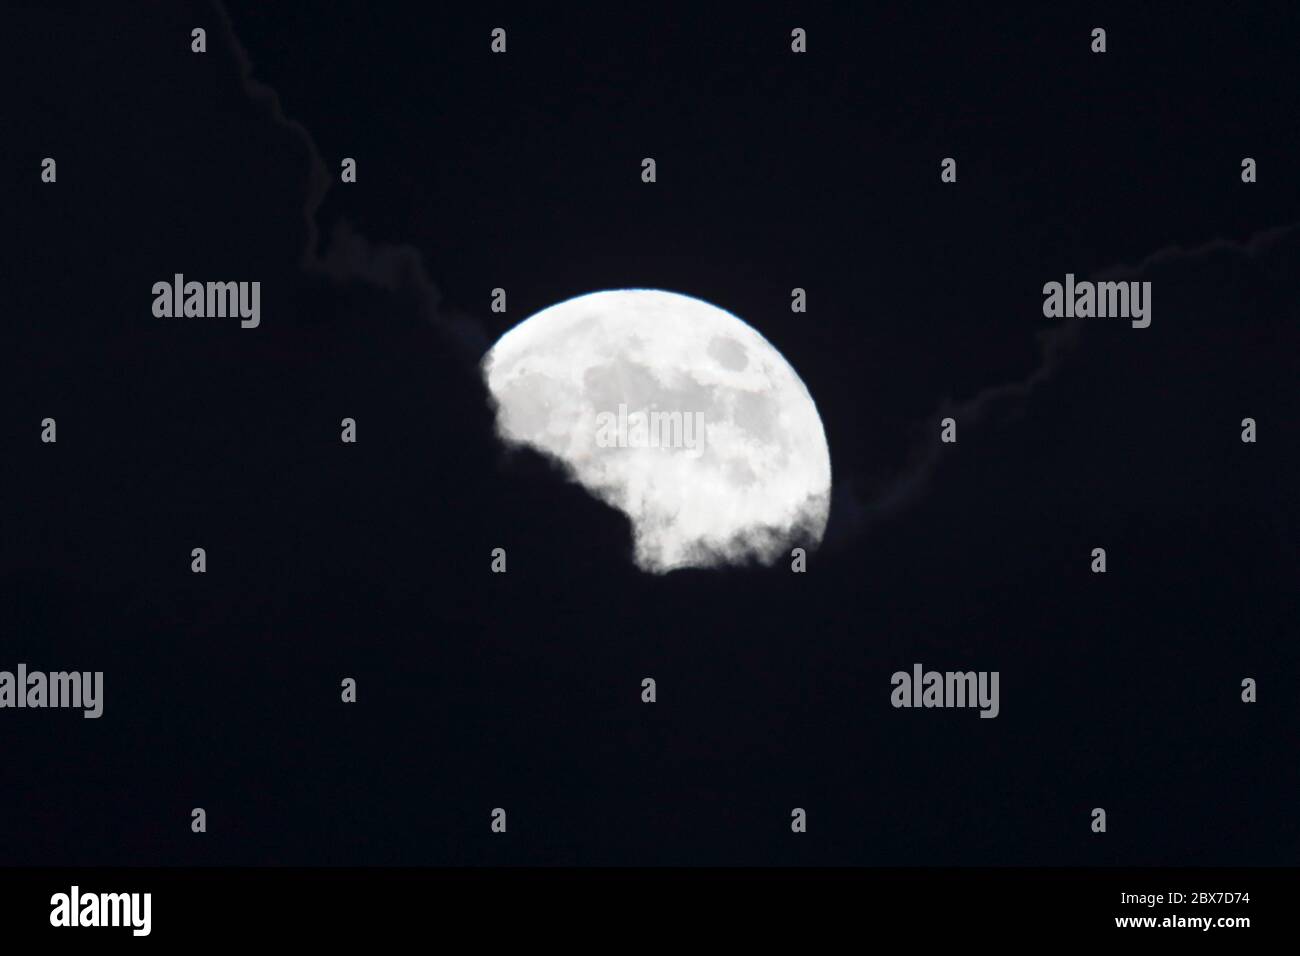 Hailsham, UK. 5th Jun 2020. UK weather. Tonights full moon, also known as a strawberry moon, rises behind clouds over Hailsham, East Sussex, UK. Credit: Ed Brown/Alamy Live News Stock Photo